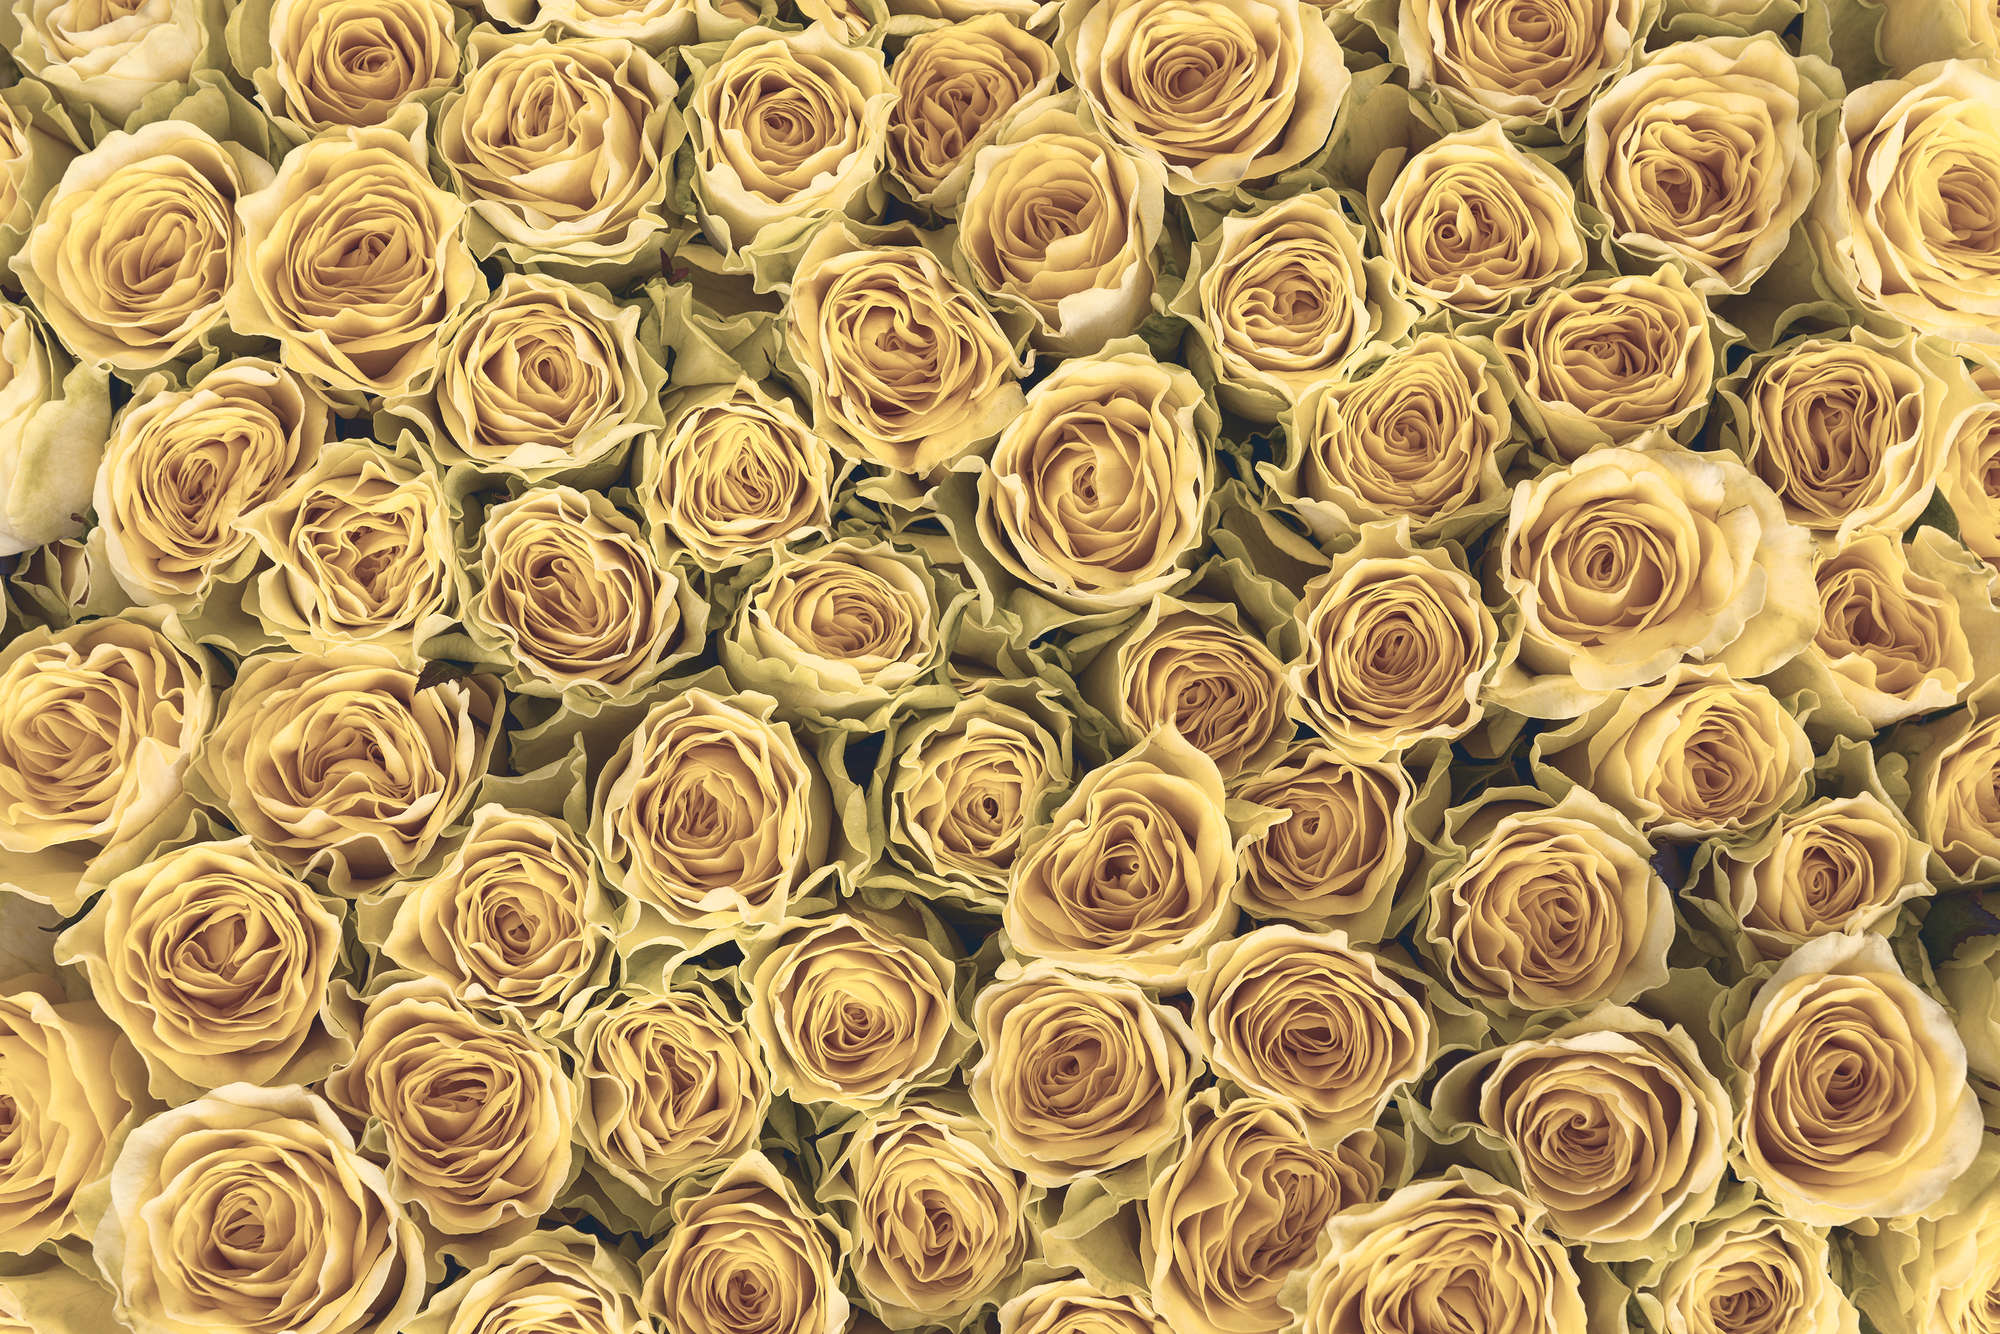             Plants mural golden roses on textured nonwoven
        